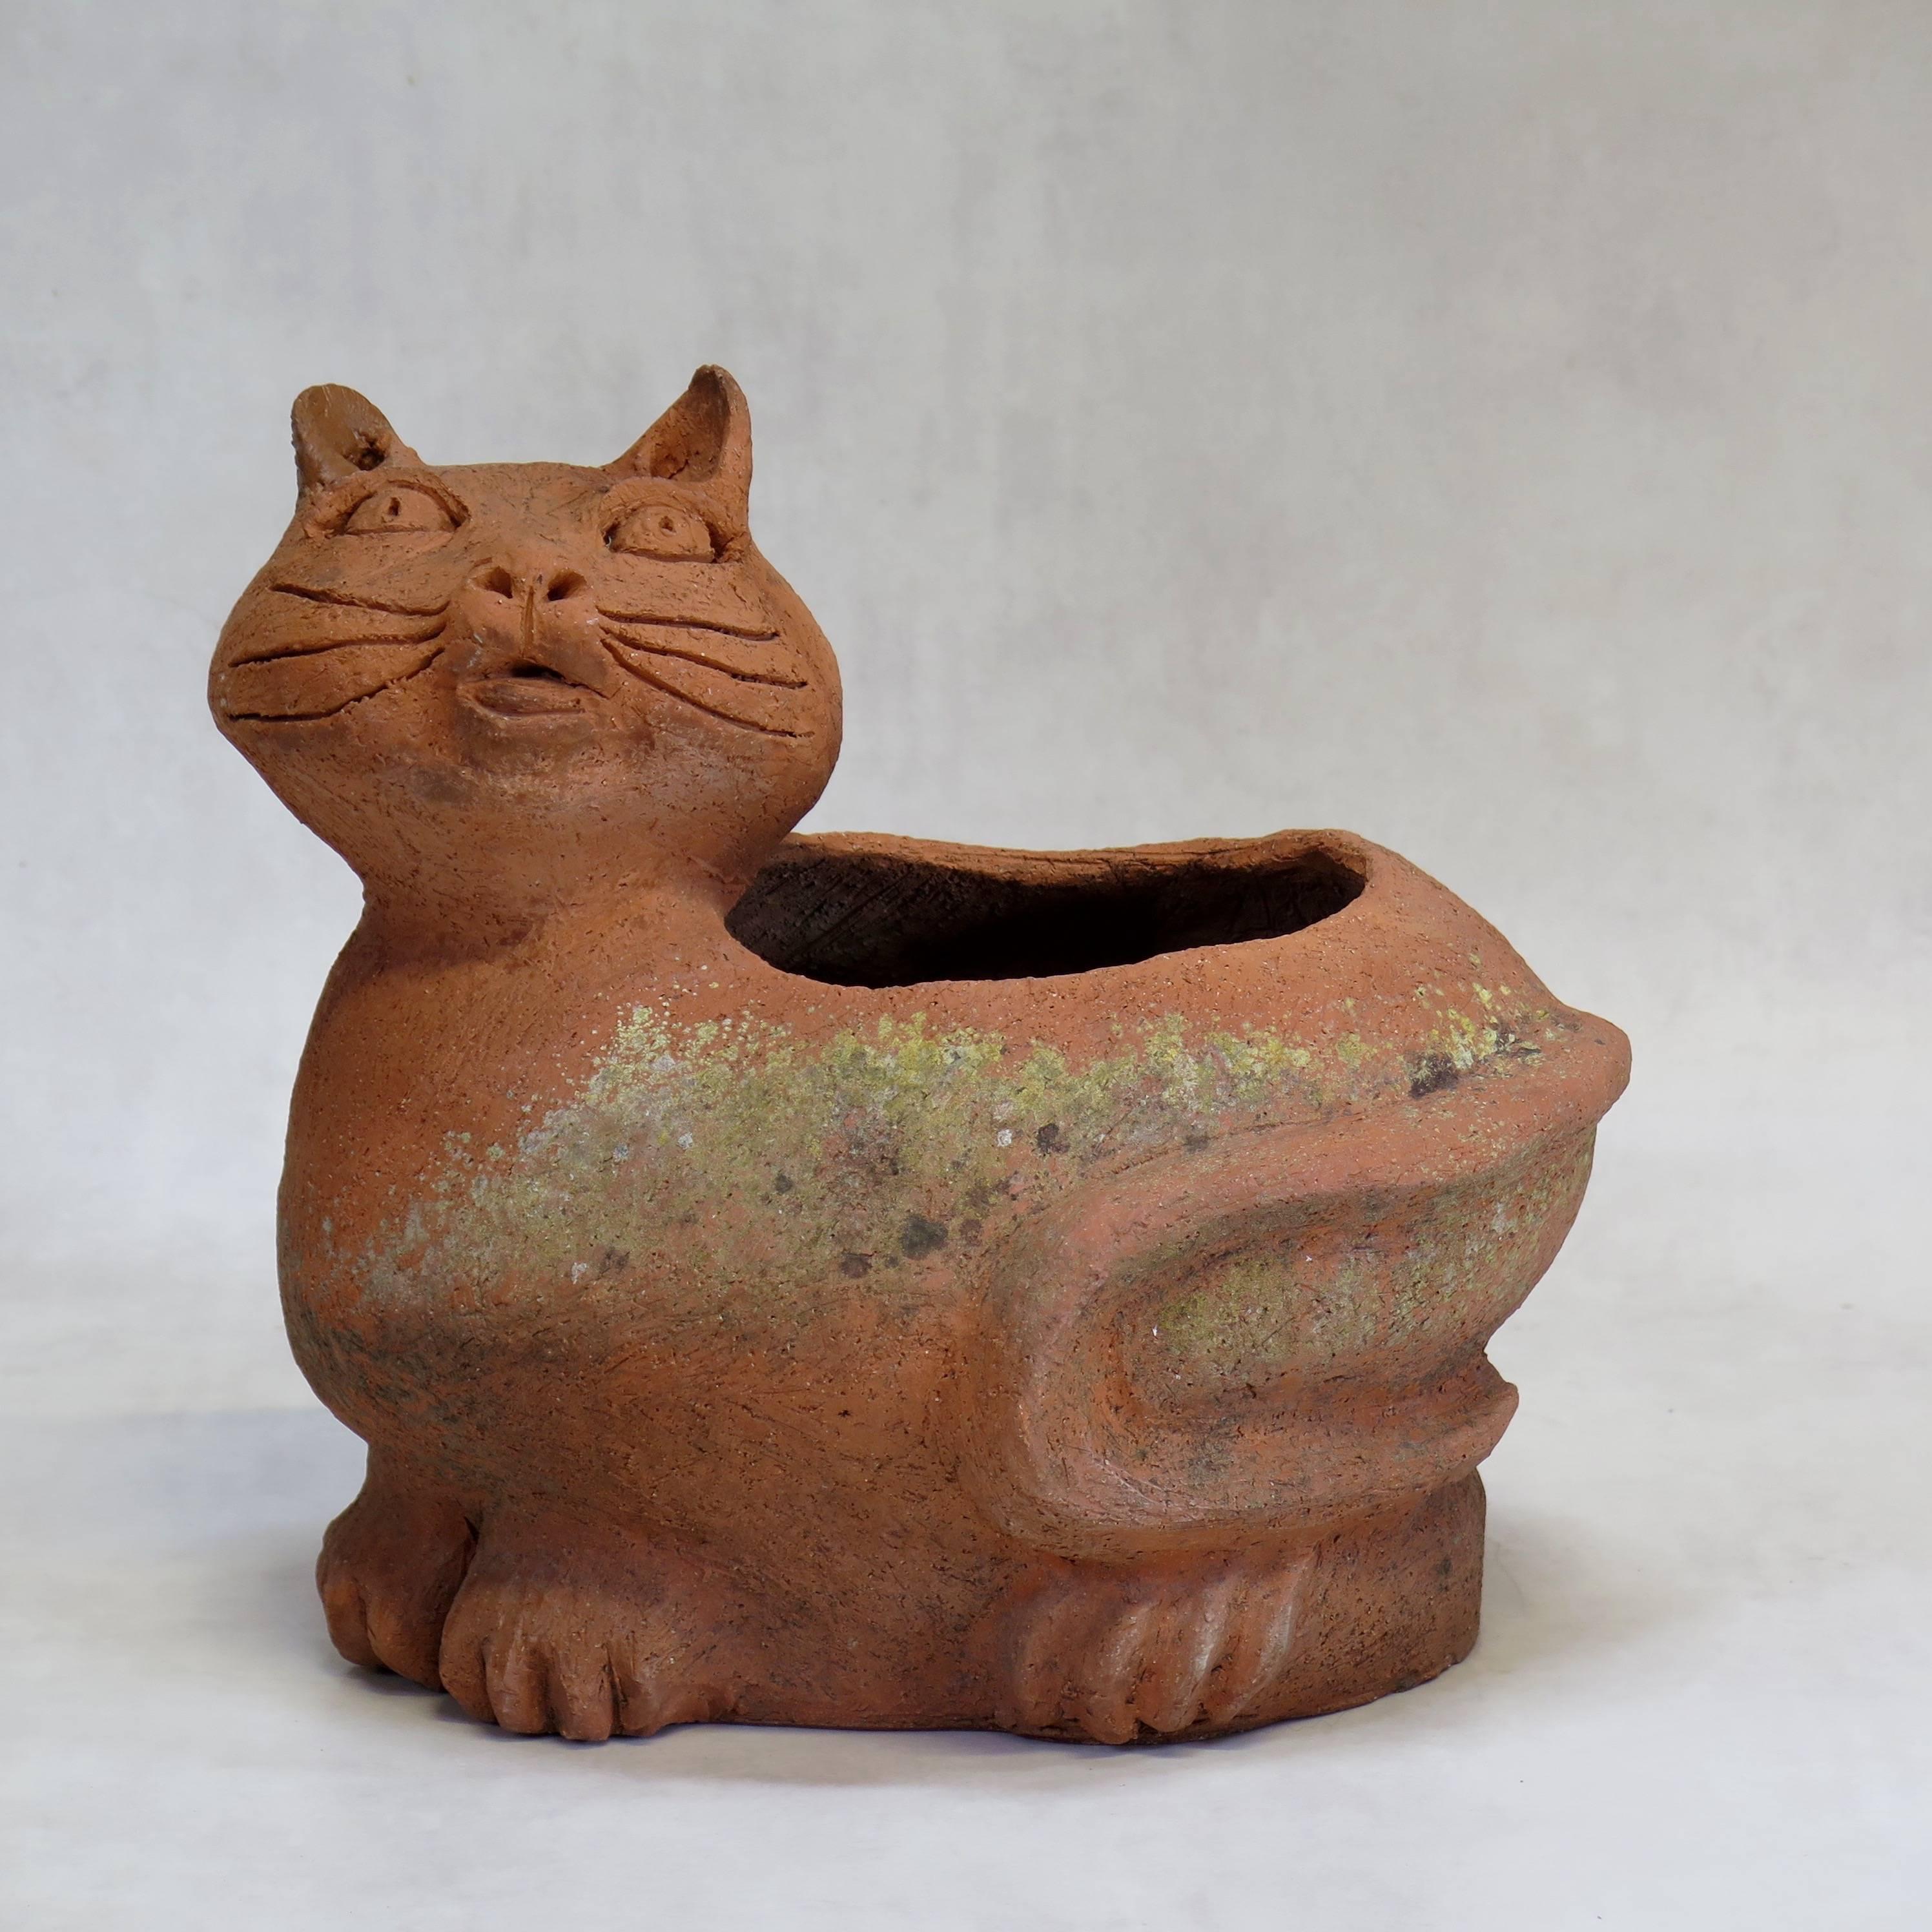 Very cute and quirky pair of cat and dog terracotta planters, with a nice patina.

Signed on the base 